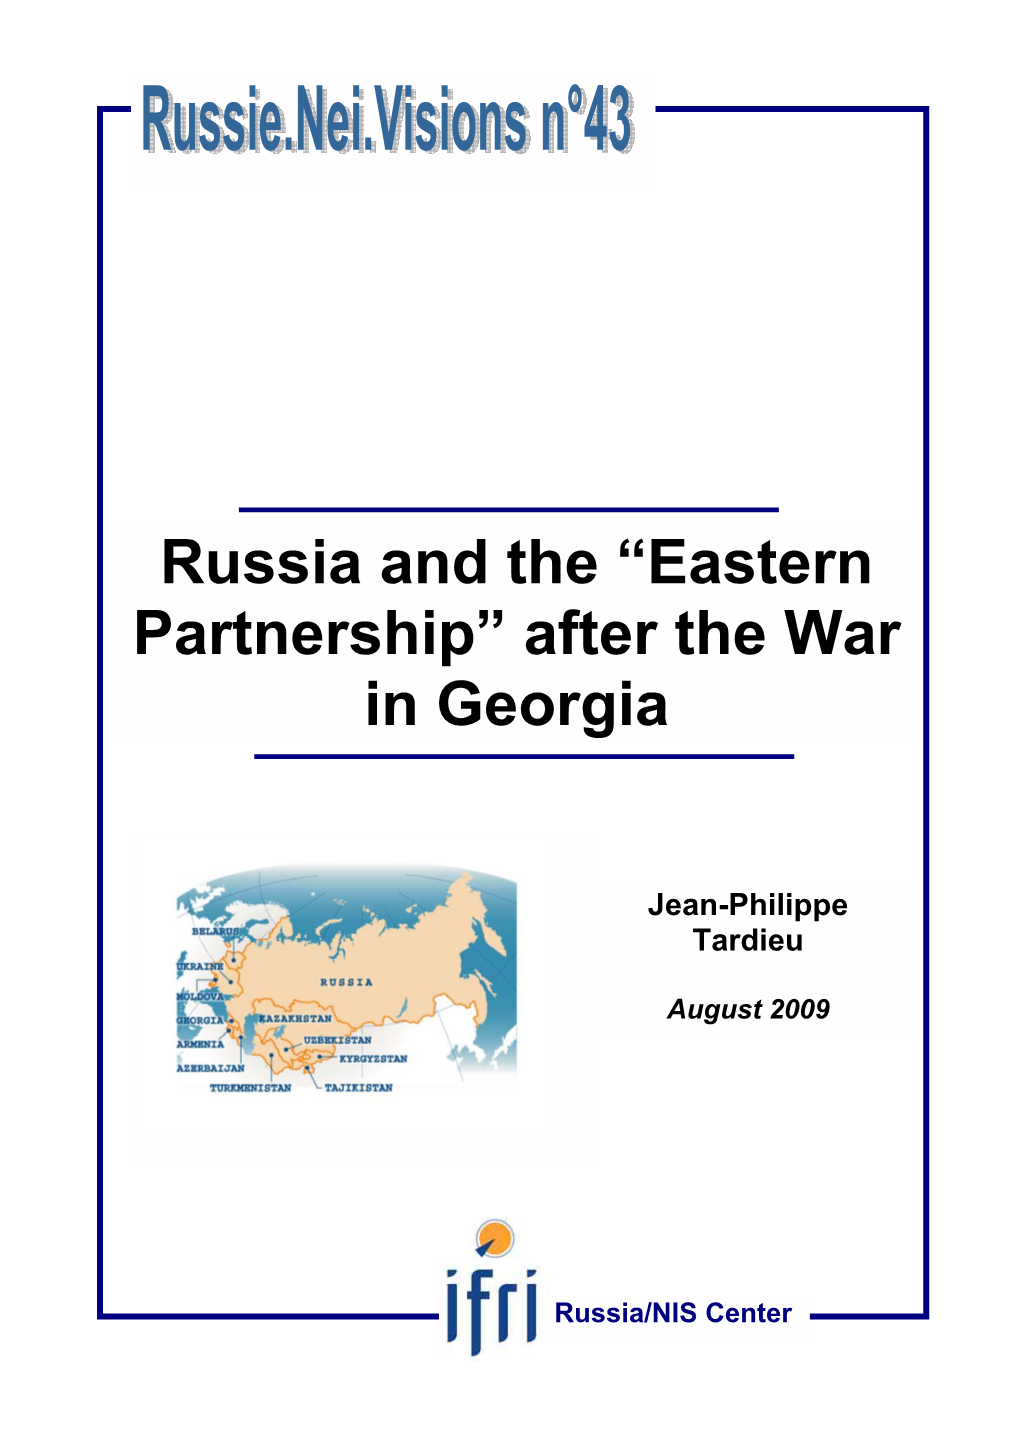 Russia and the “Eastern Partnership” After the War in Georgia